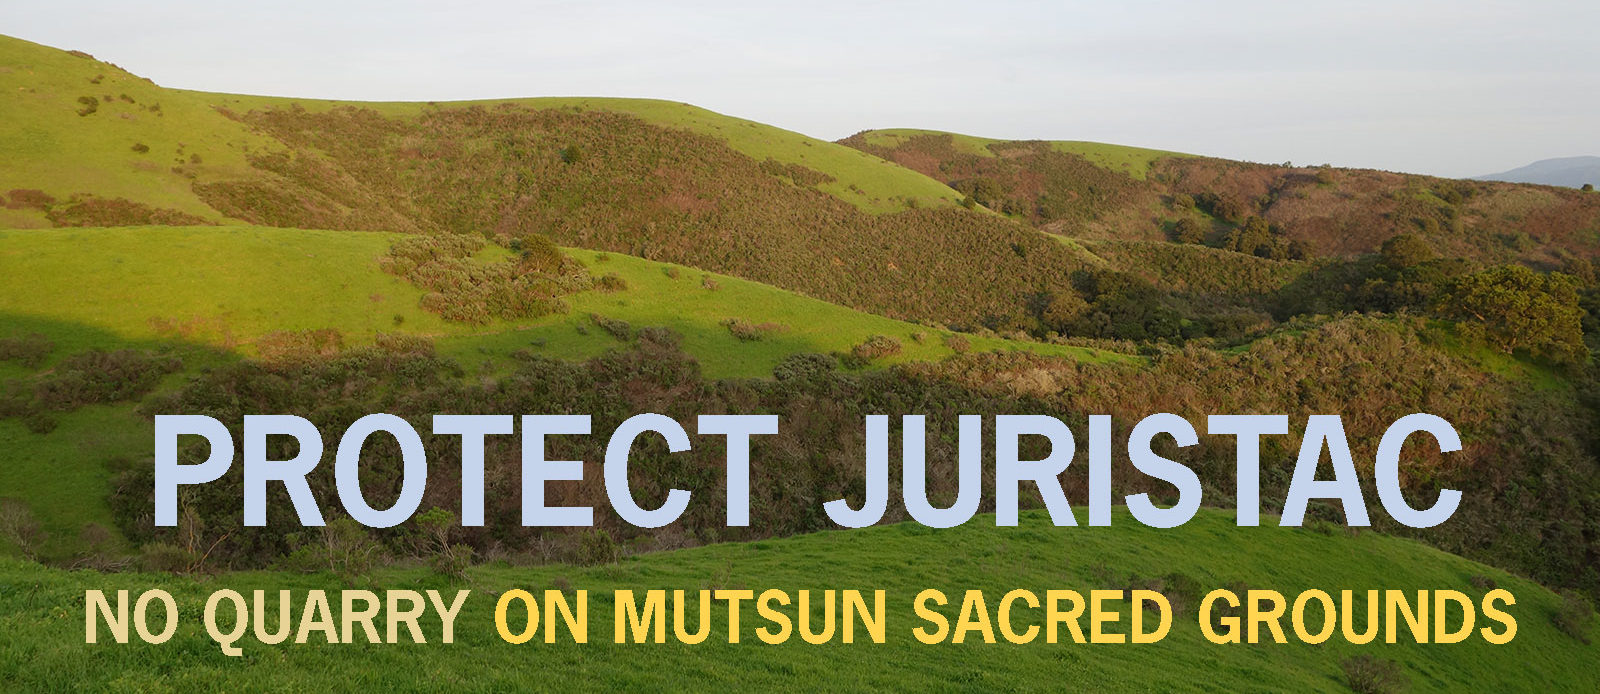 Protect Juristac: UUs Answering the Call to Support Indigenous Rights in California